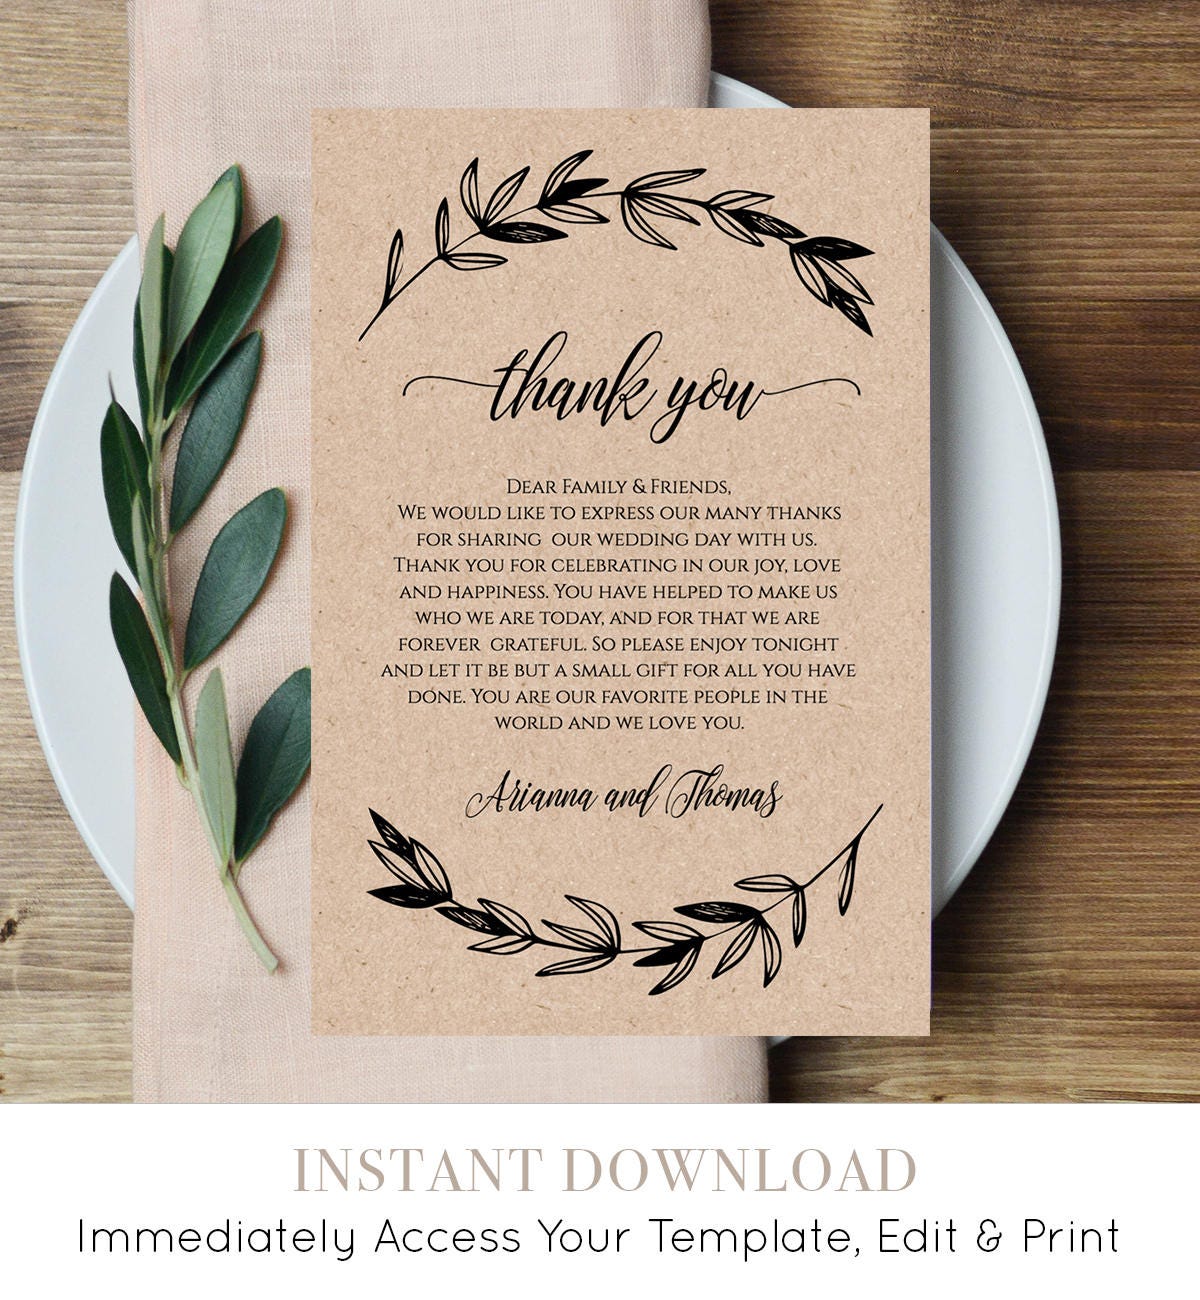 View How To Thank For Wedding Invitation Pics - rockchalkjay